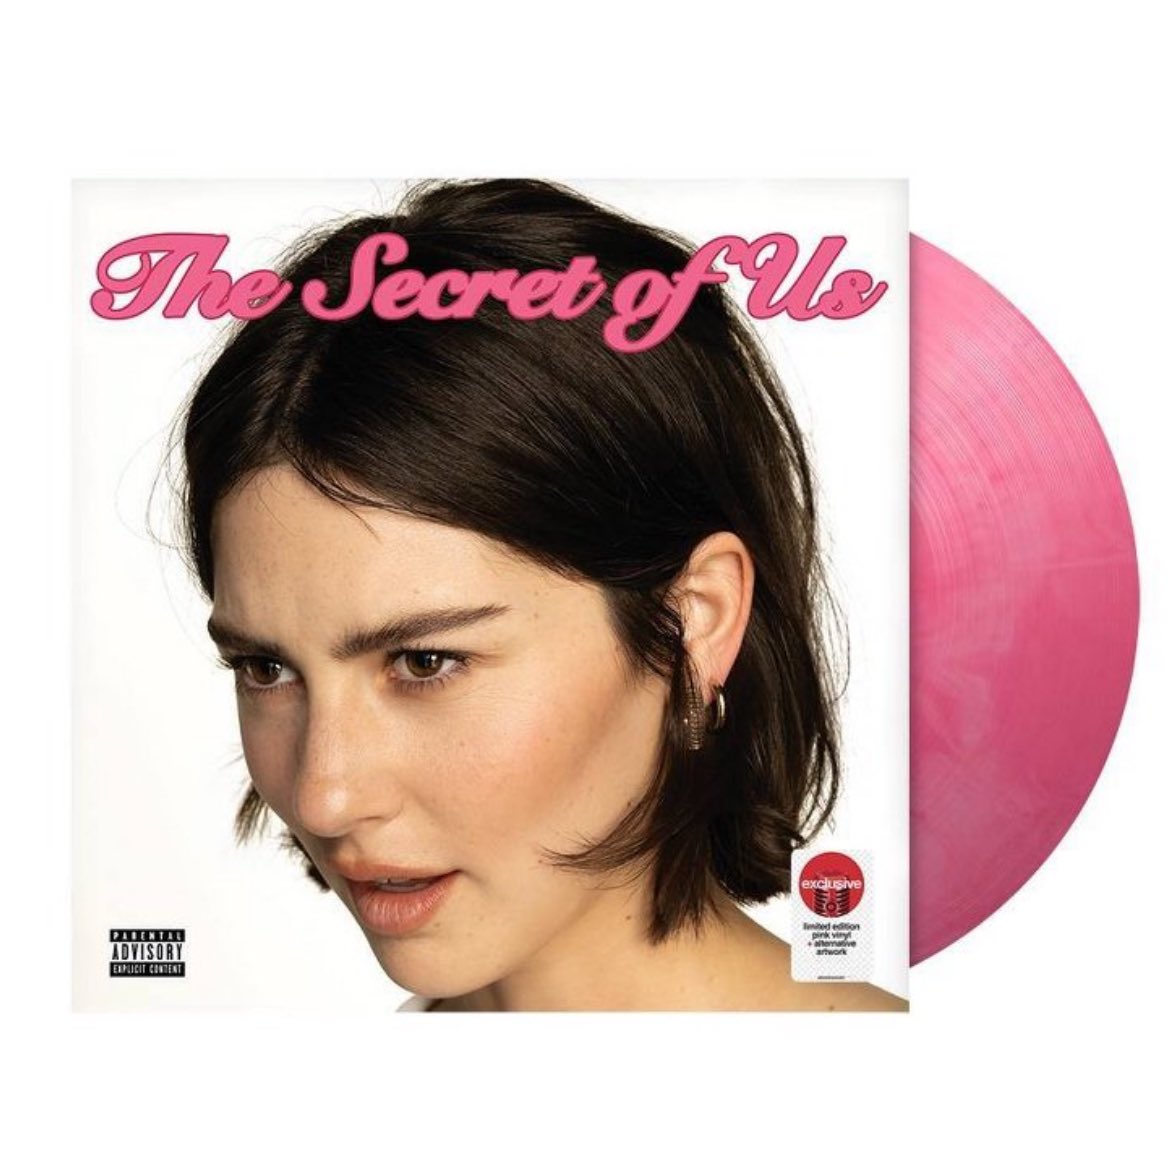 The Target exclusive ‘The Secret of Us’ vinyl is on sale now, featuring an alt cover!

🔗: bit.ly/4djAfVl